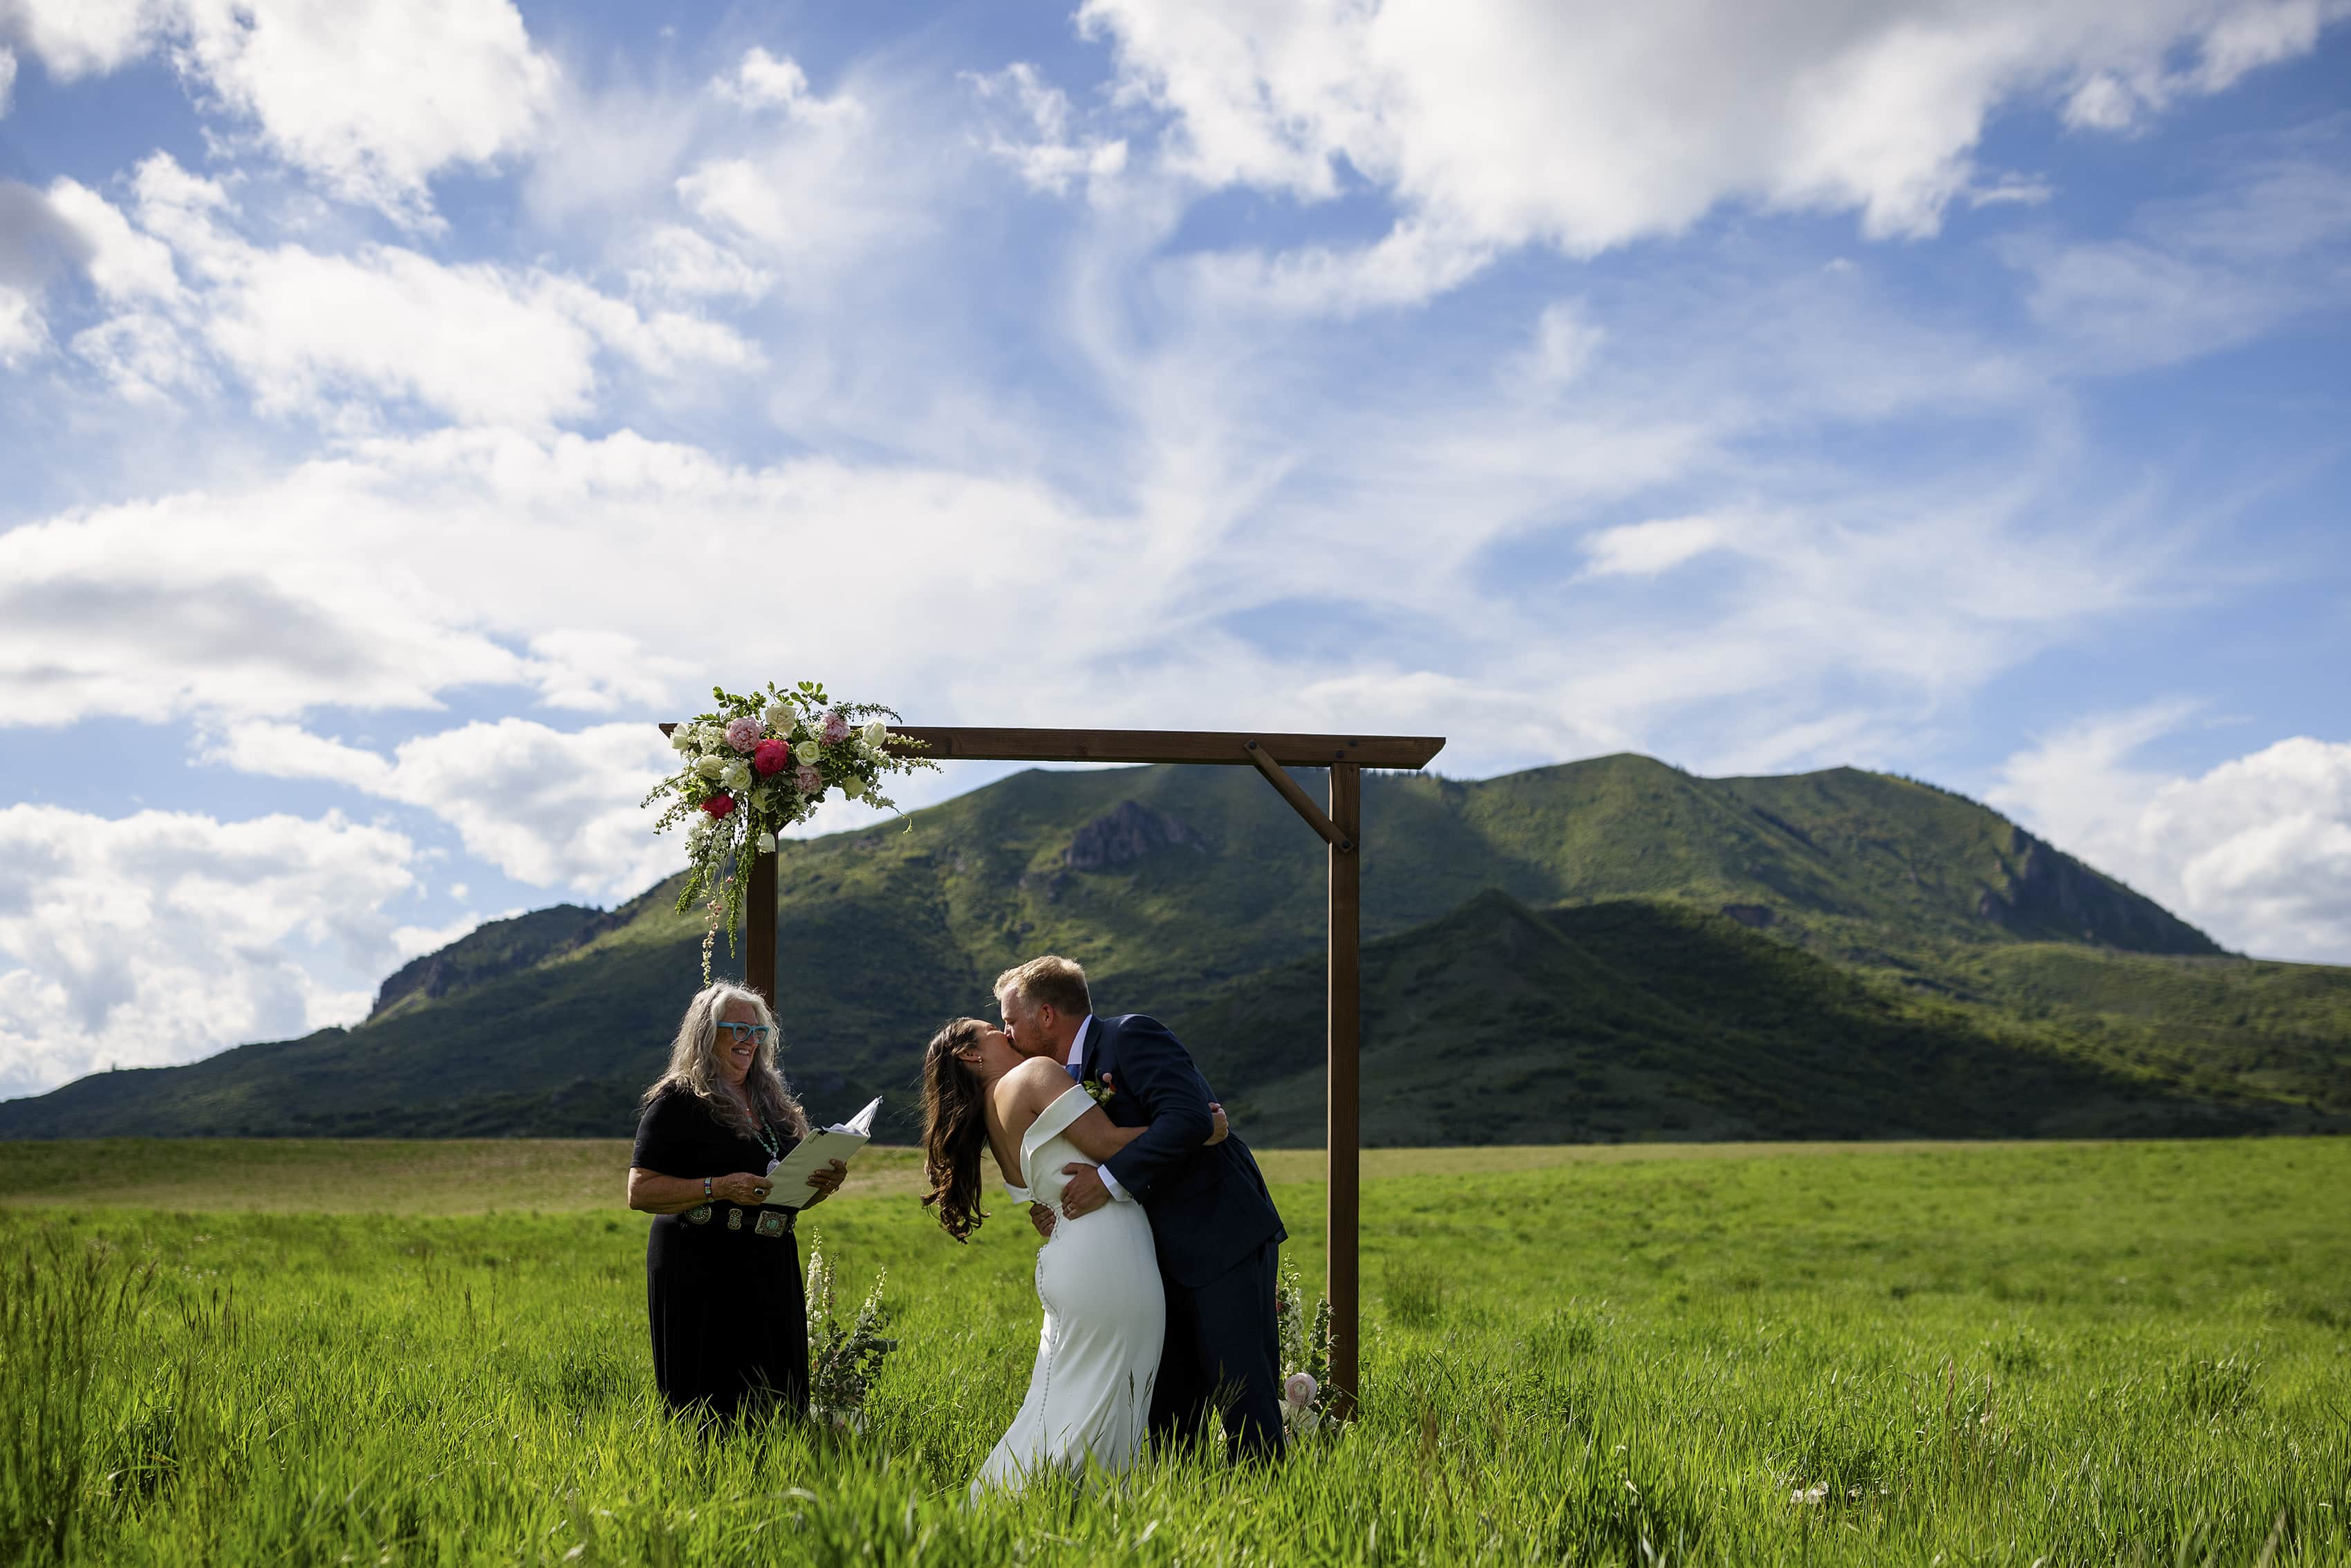 The bride and groom share their first kiss under an arbor with Elk Mountain in the background in Steamboat Springs